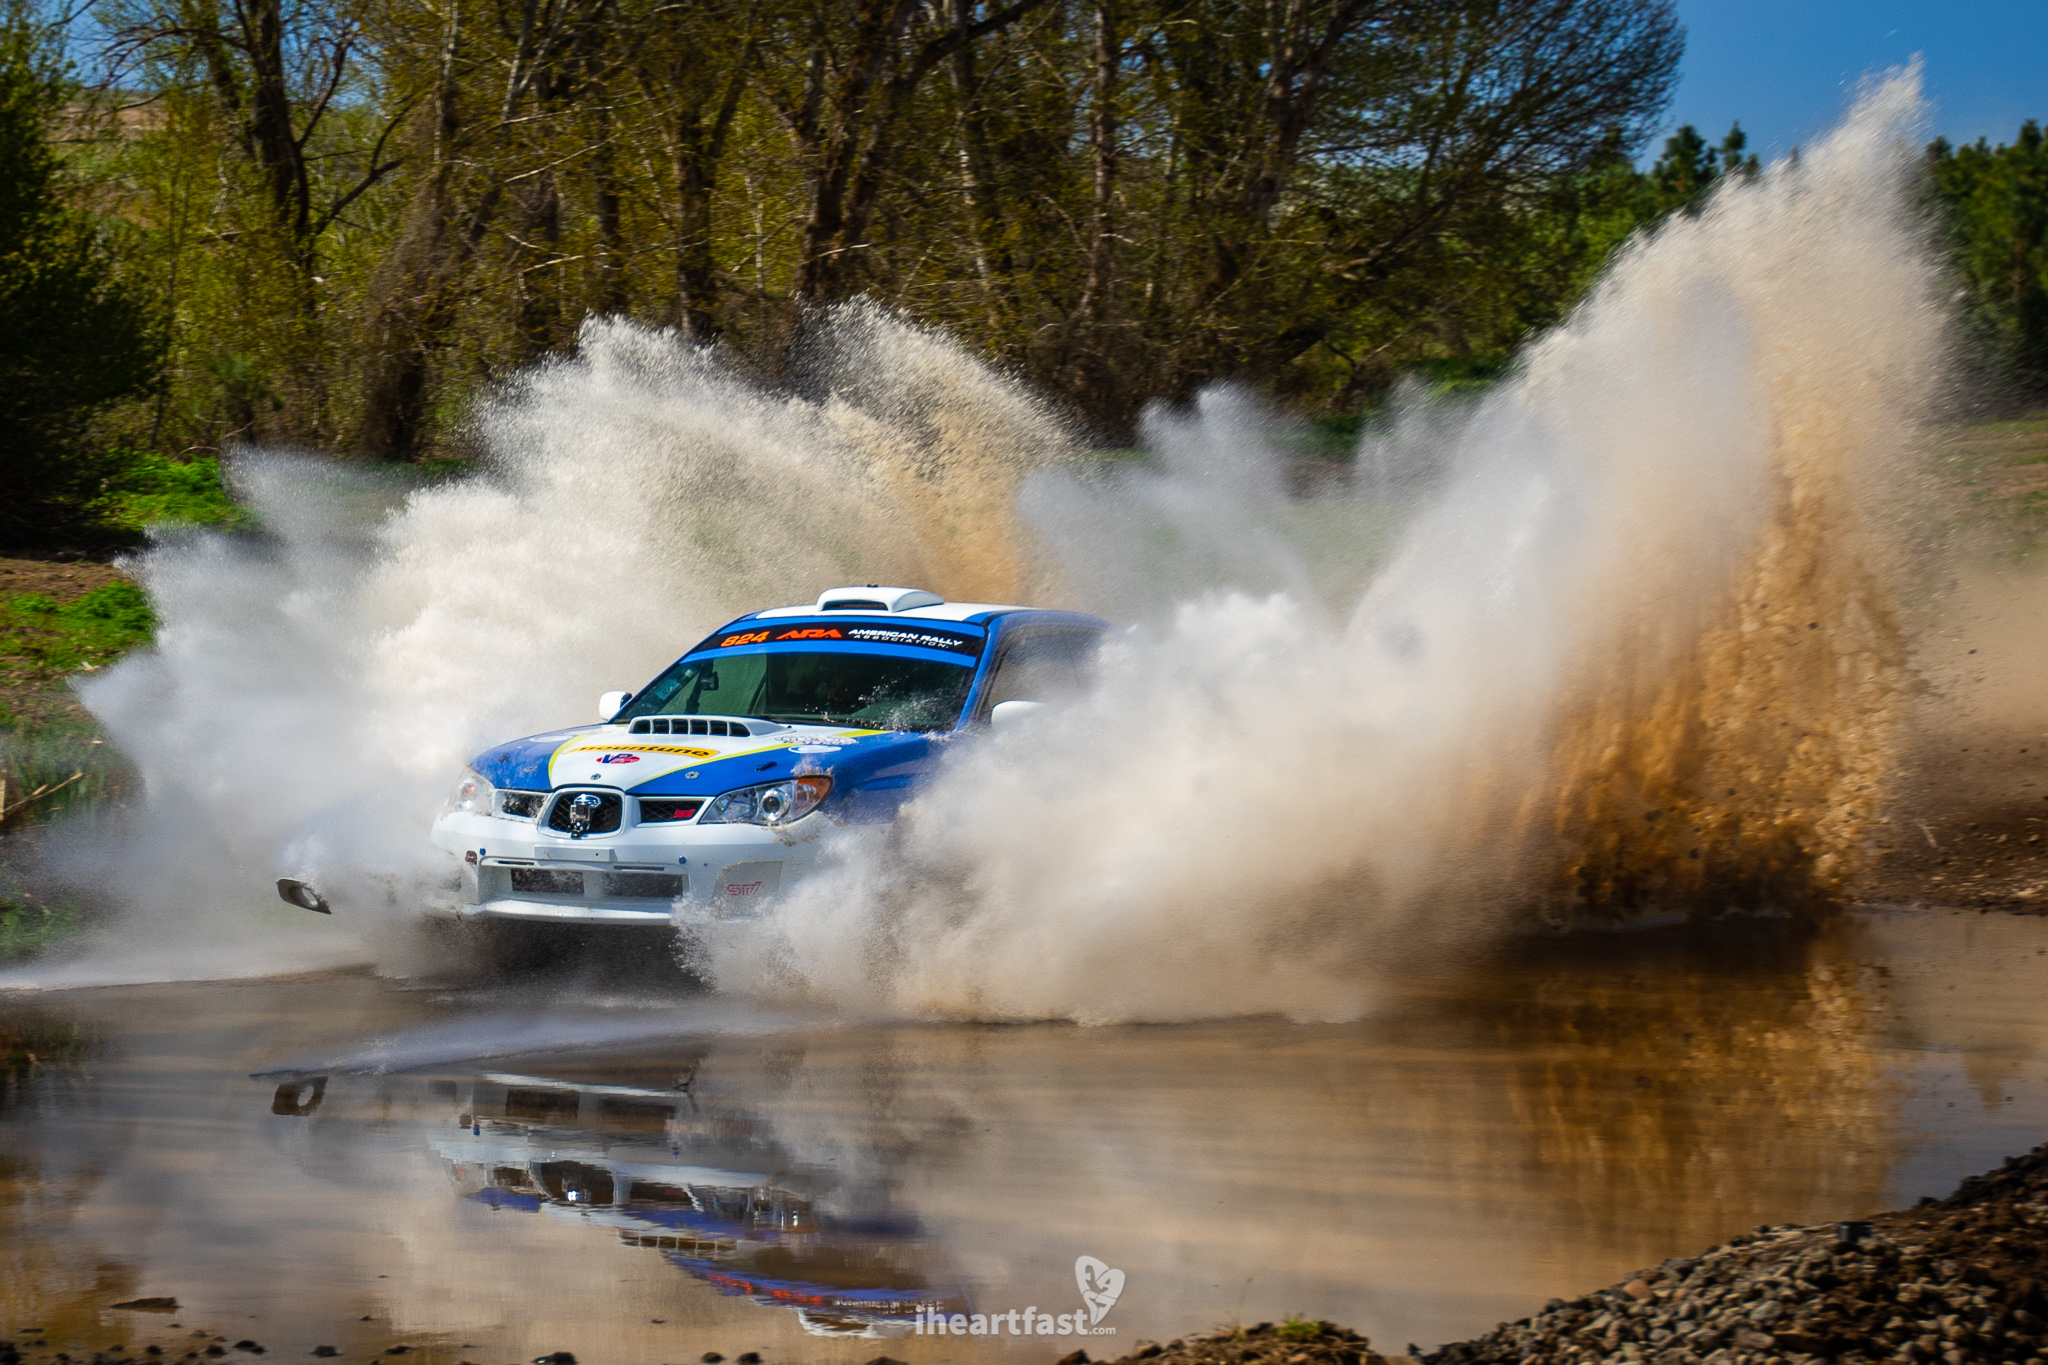 Cameron Steeley loses a foglight cover as they go through the water crossing